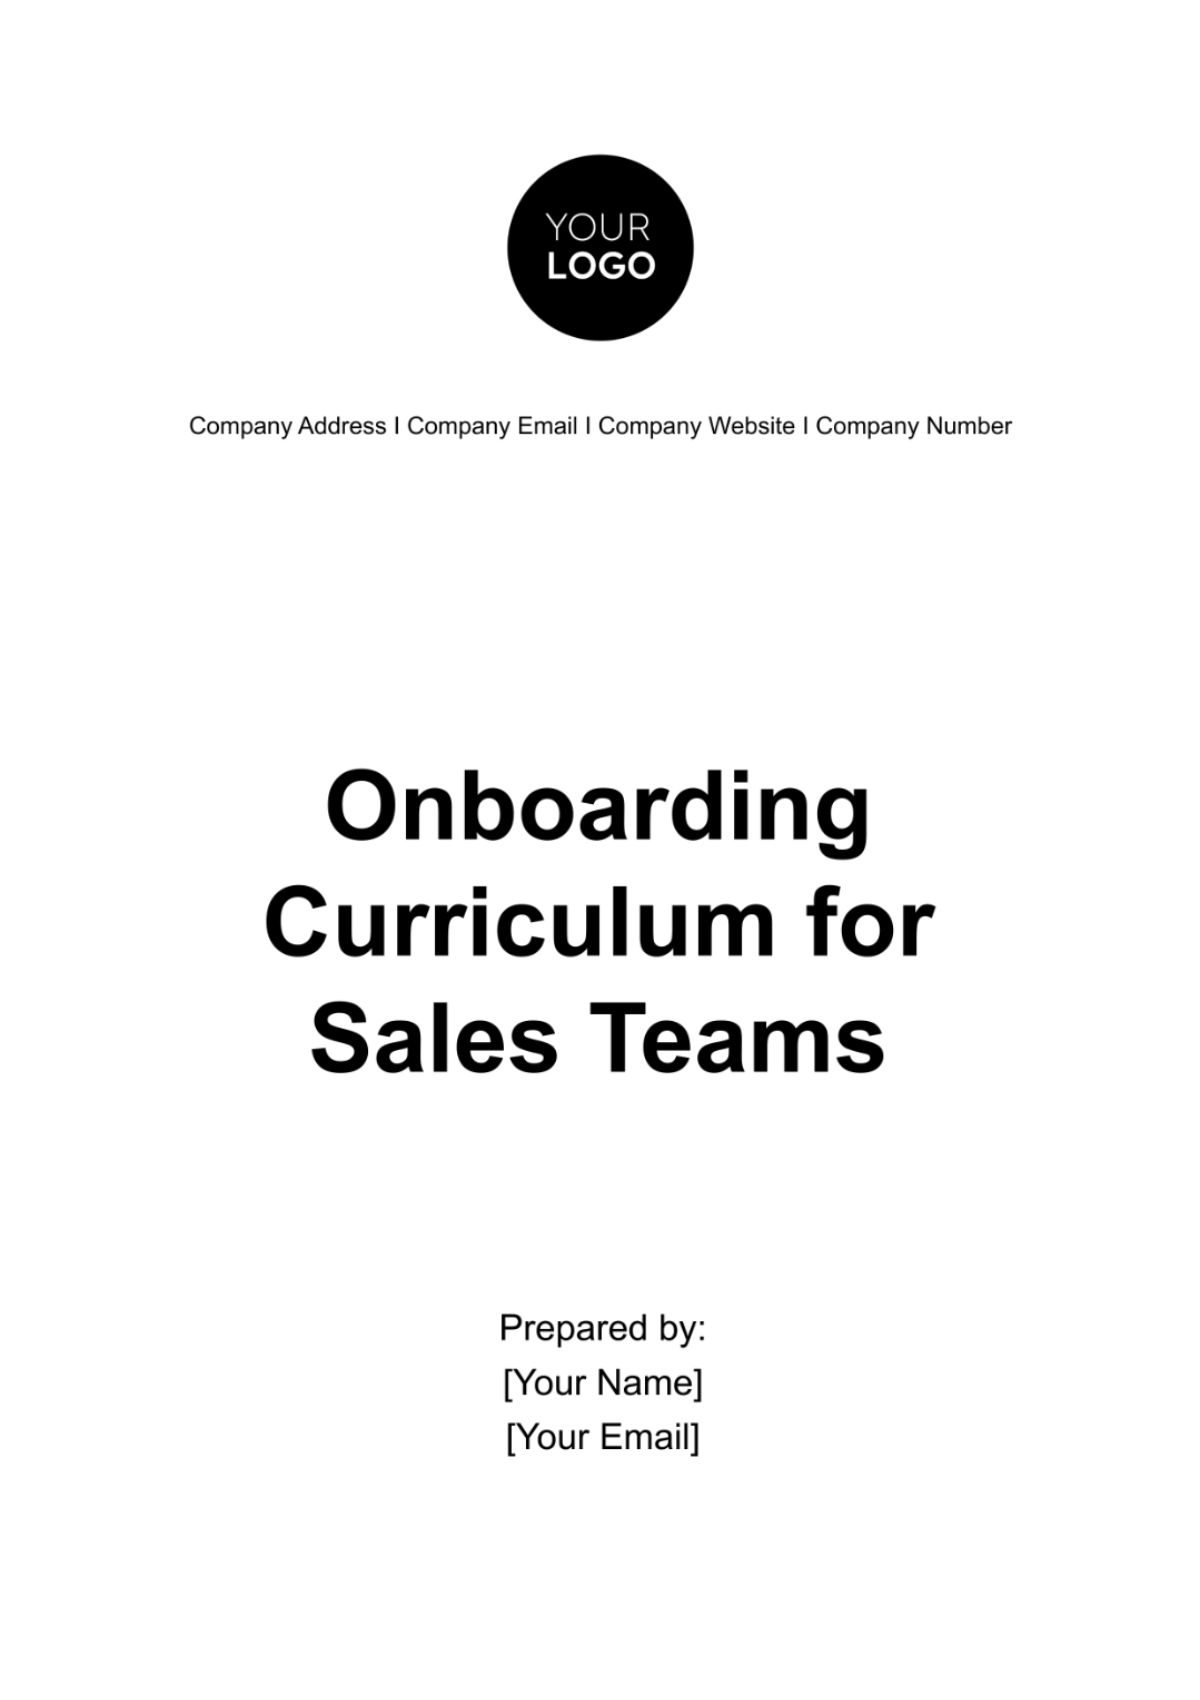 Onboarding Curriculum for Sales Teams Template